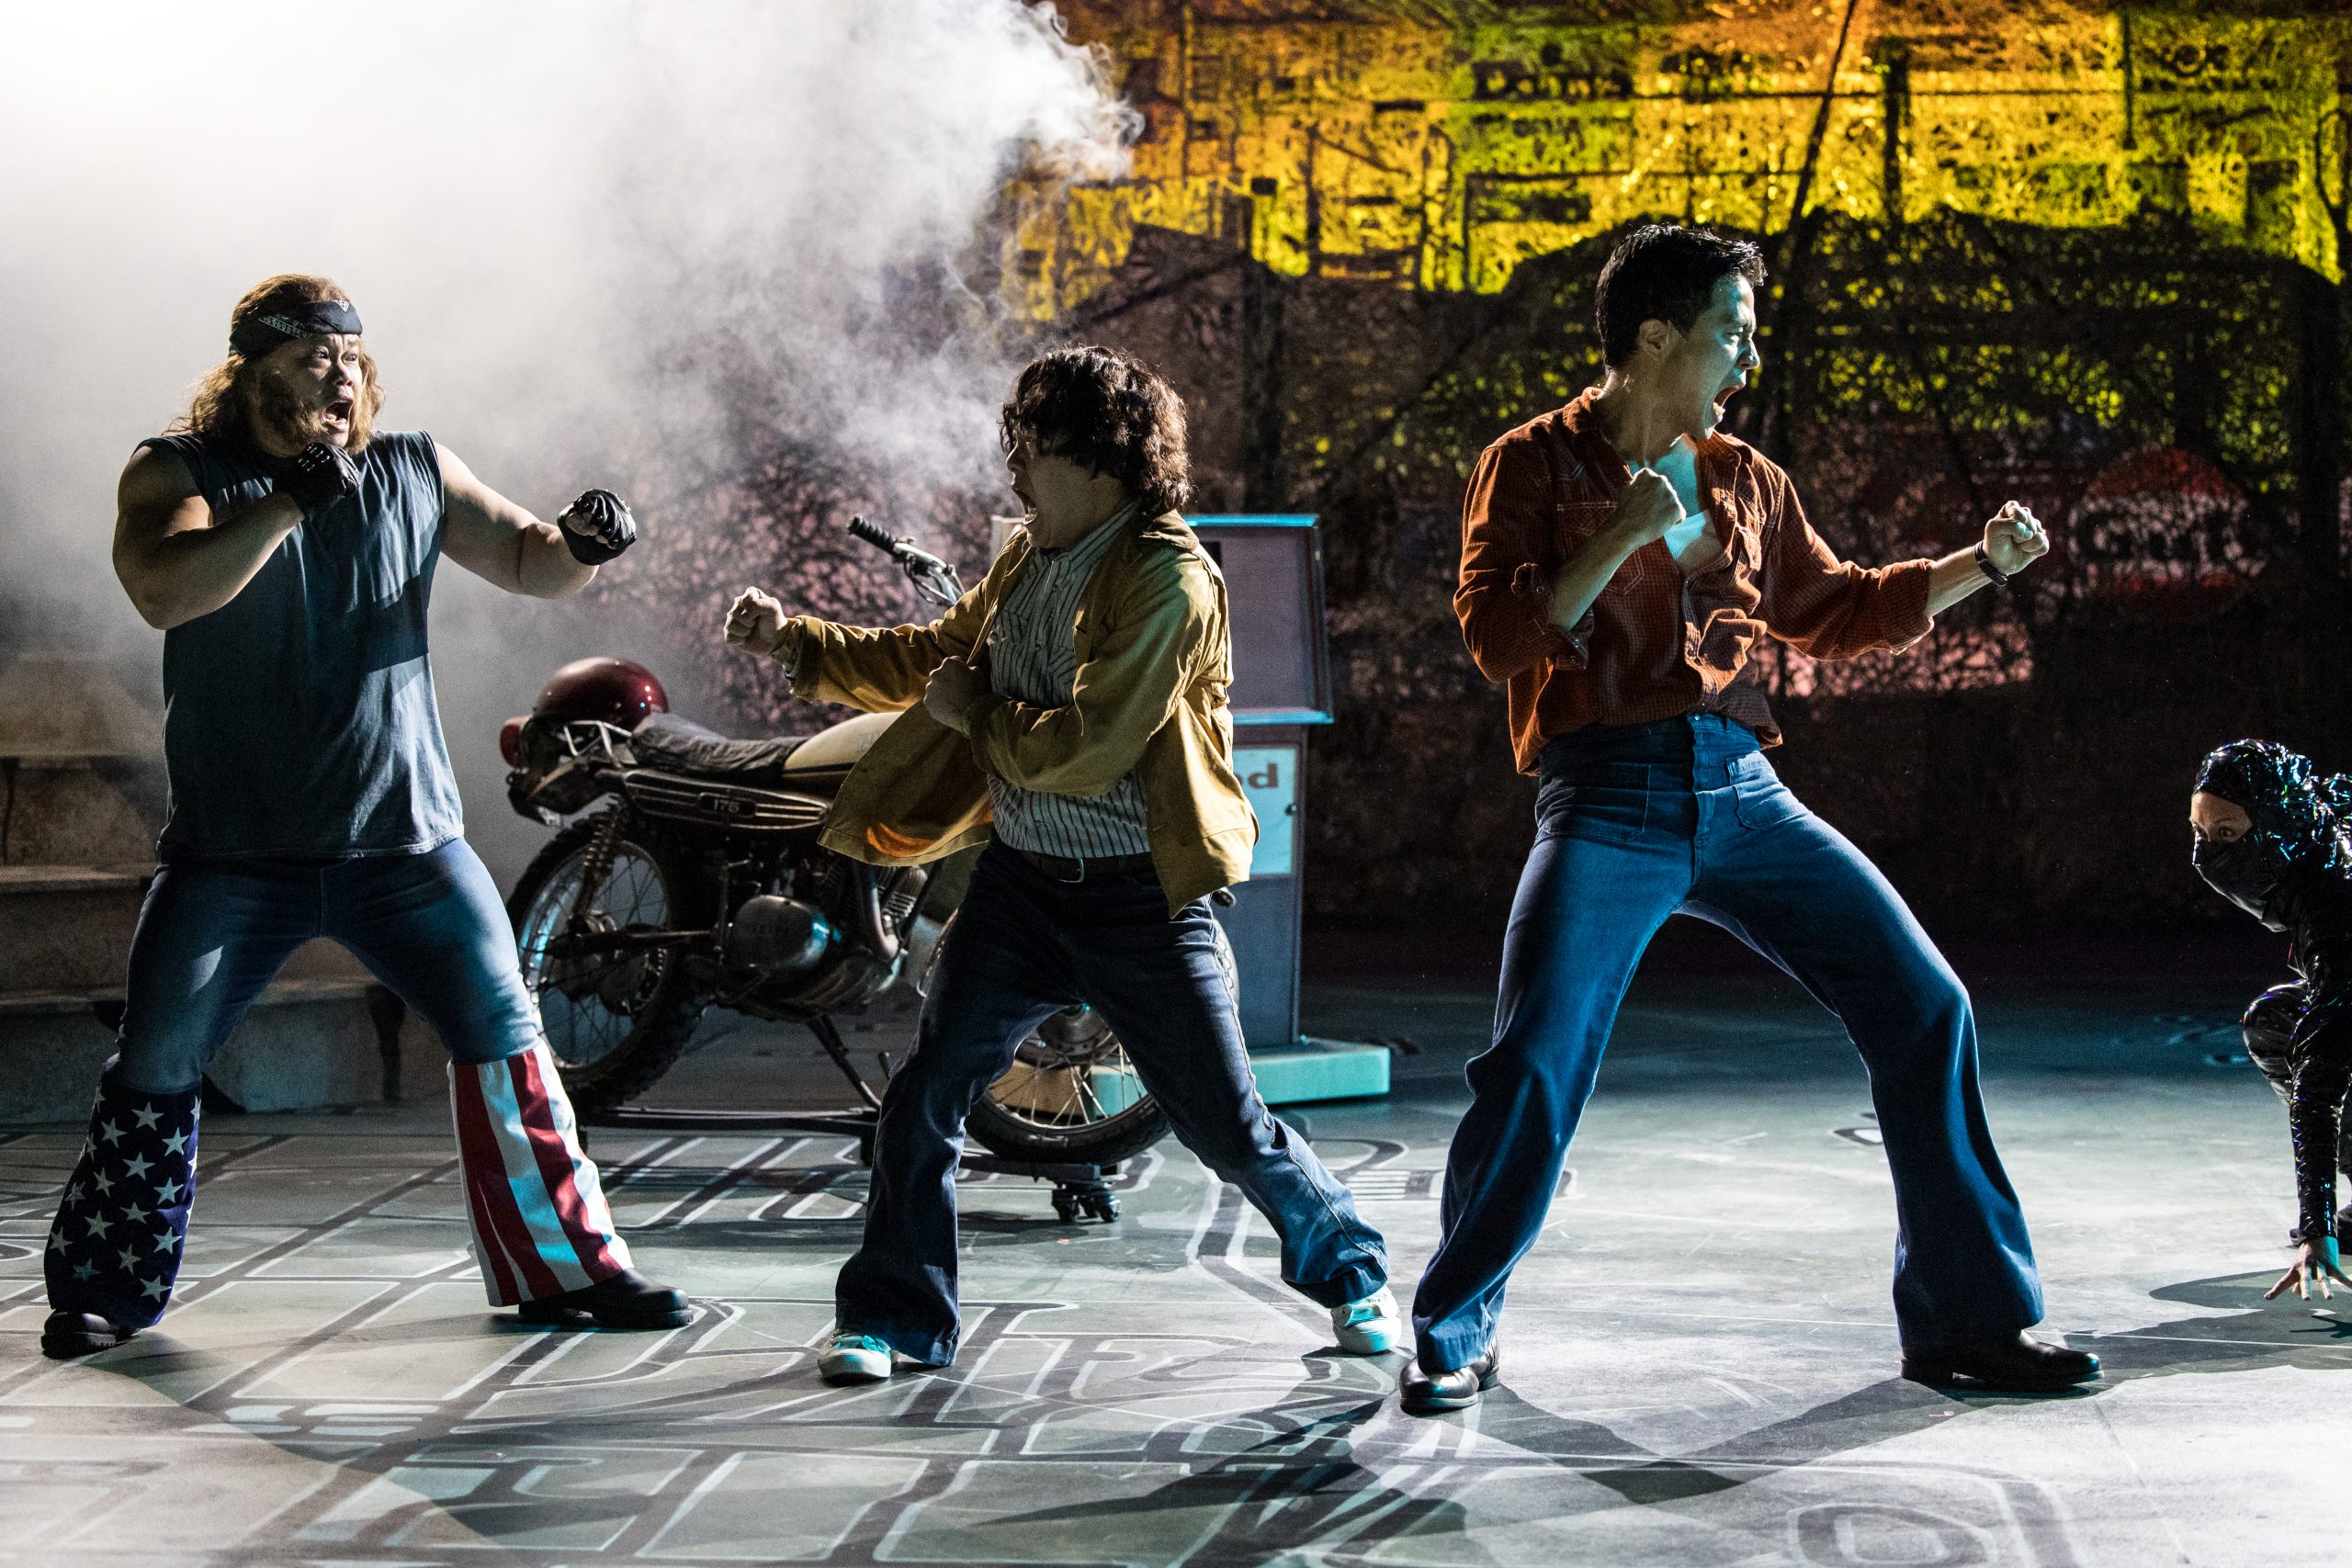 Ninja Fight in the play Vietgone